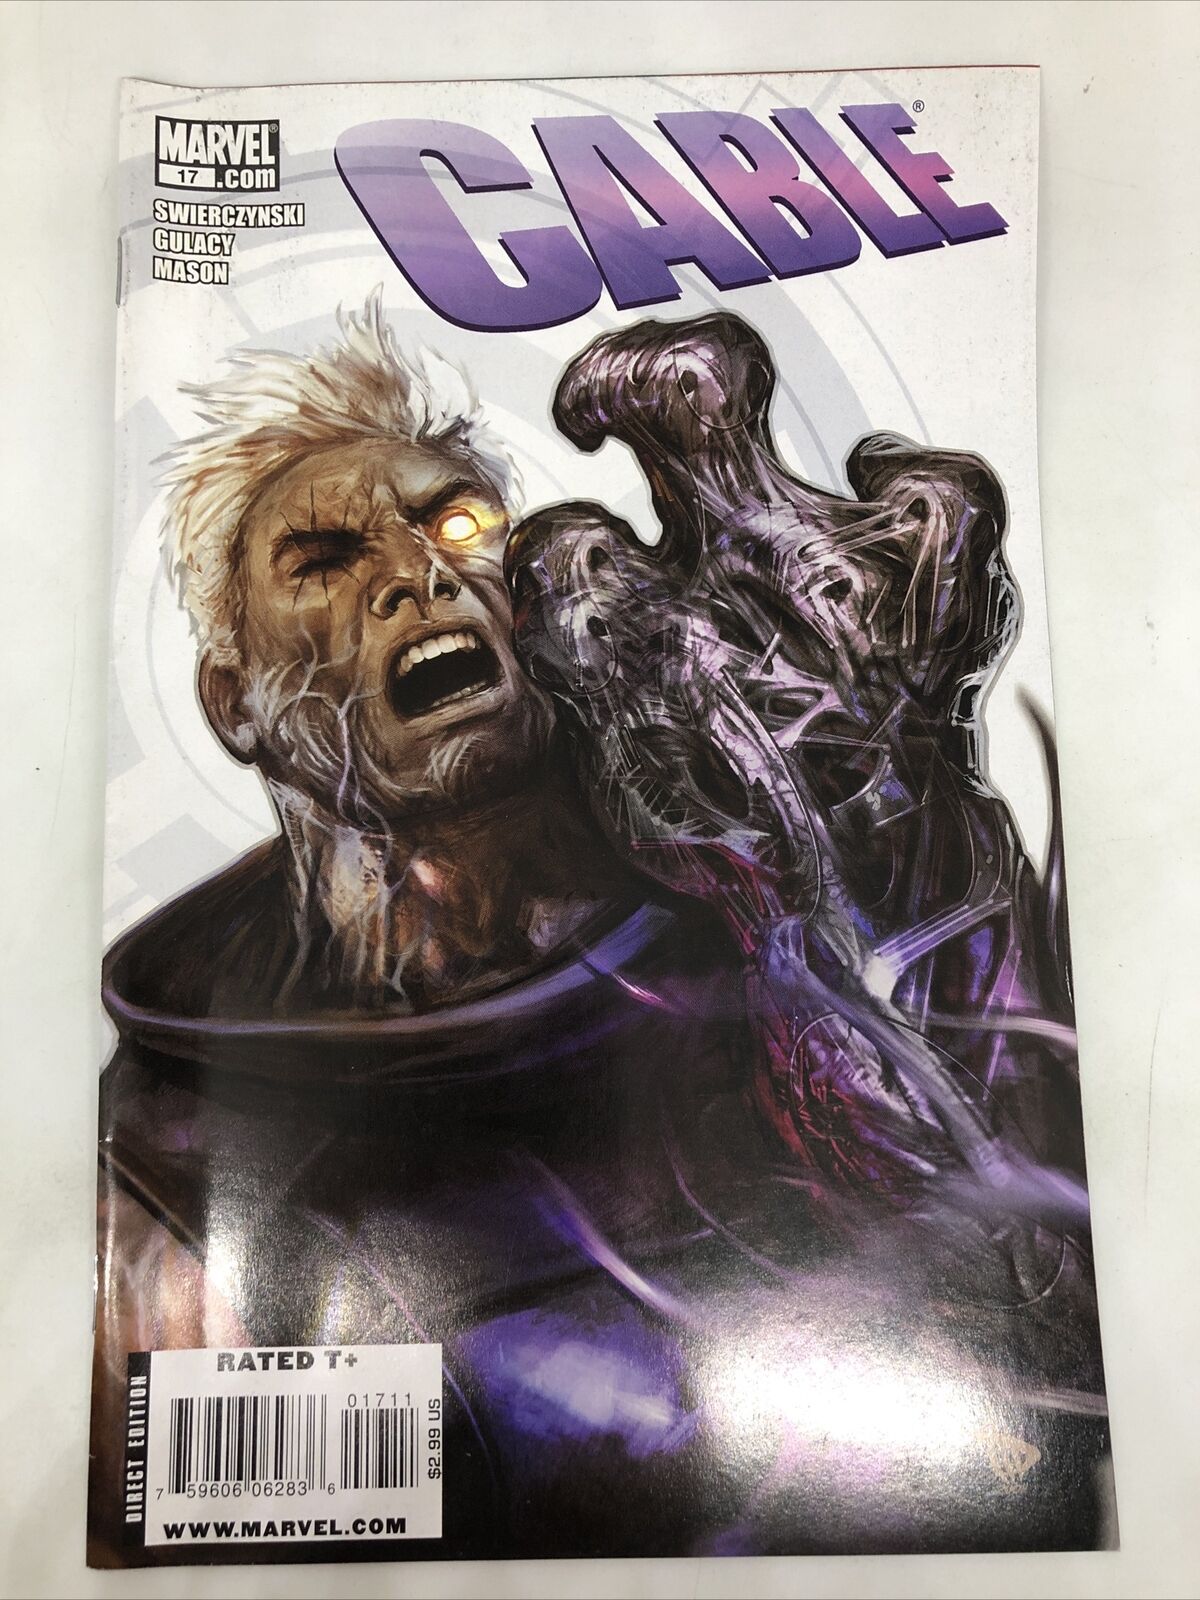 CABLE #17 (2ND SERIES) MARVEL COMICS 2009 